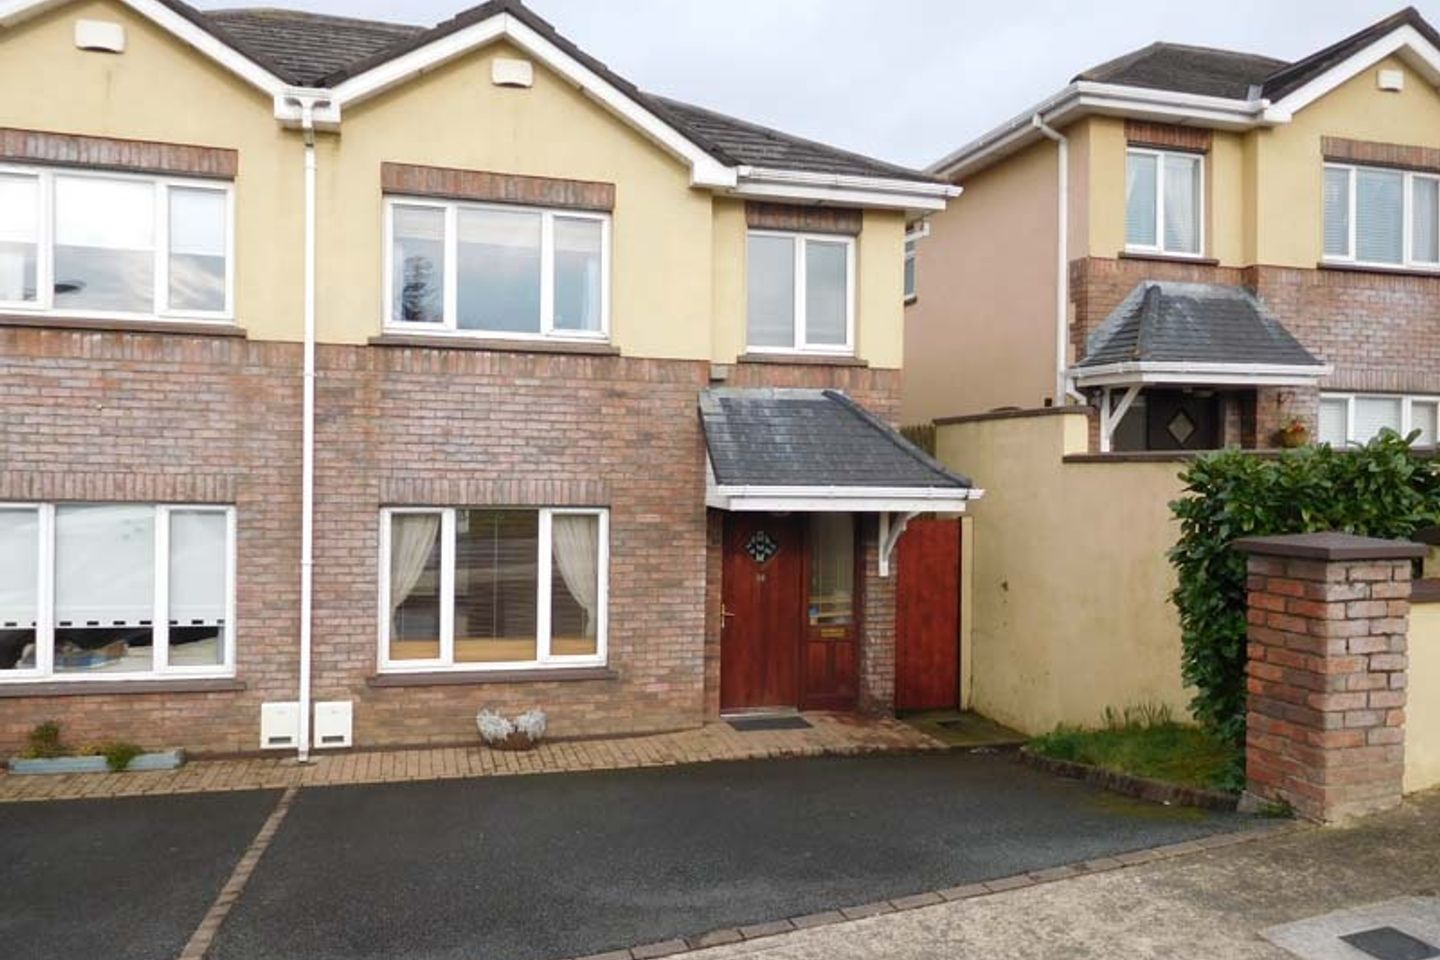 98 Grahams Court, Wicklow Town, Co. Wicklow, A67FC89